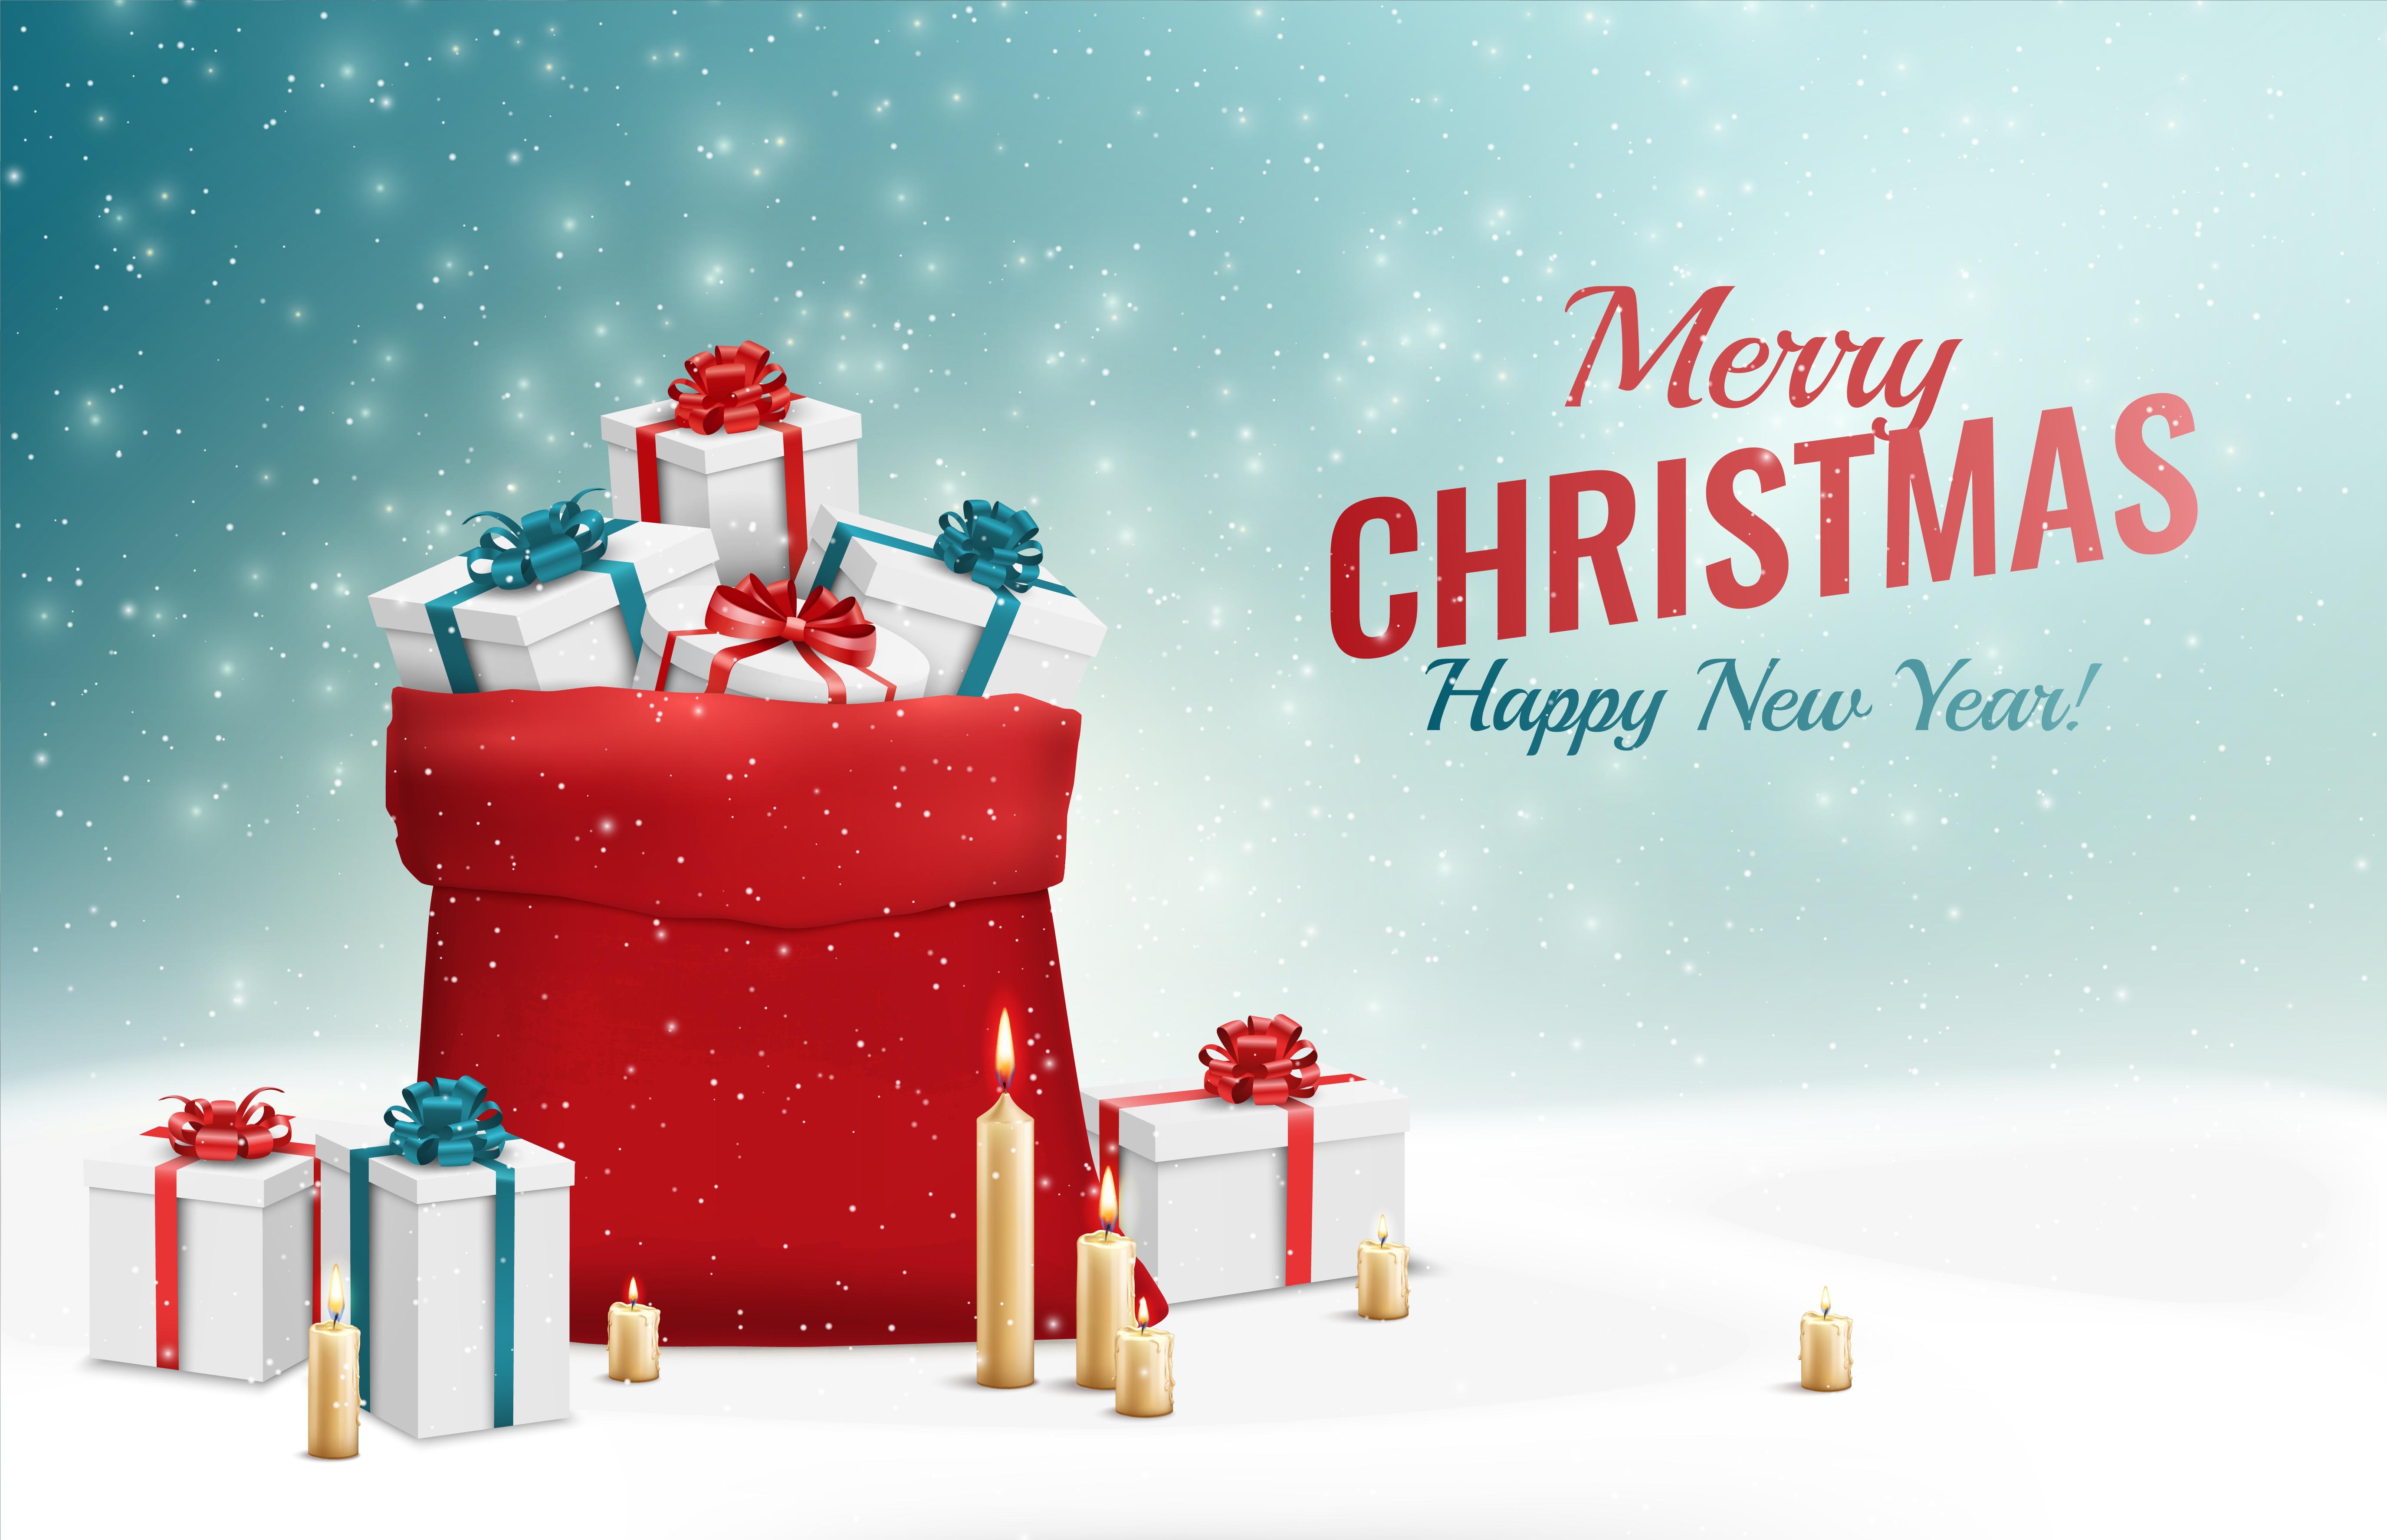 Free download 4K Merry Christmas Wallpapers Background Images